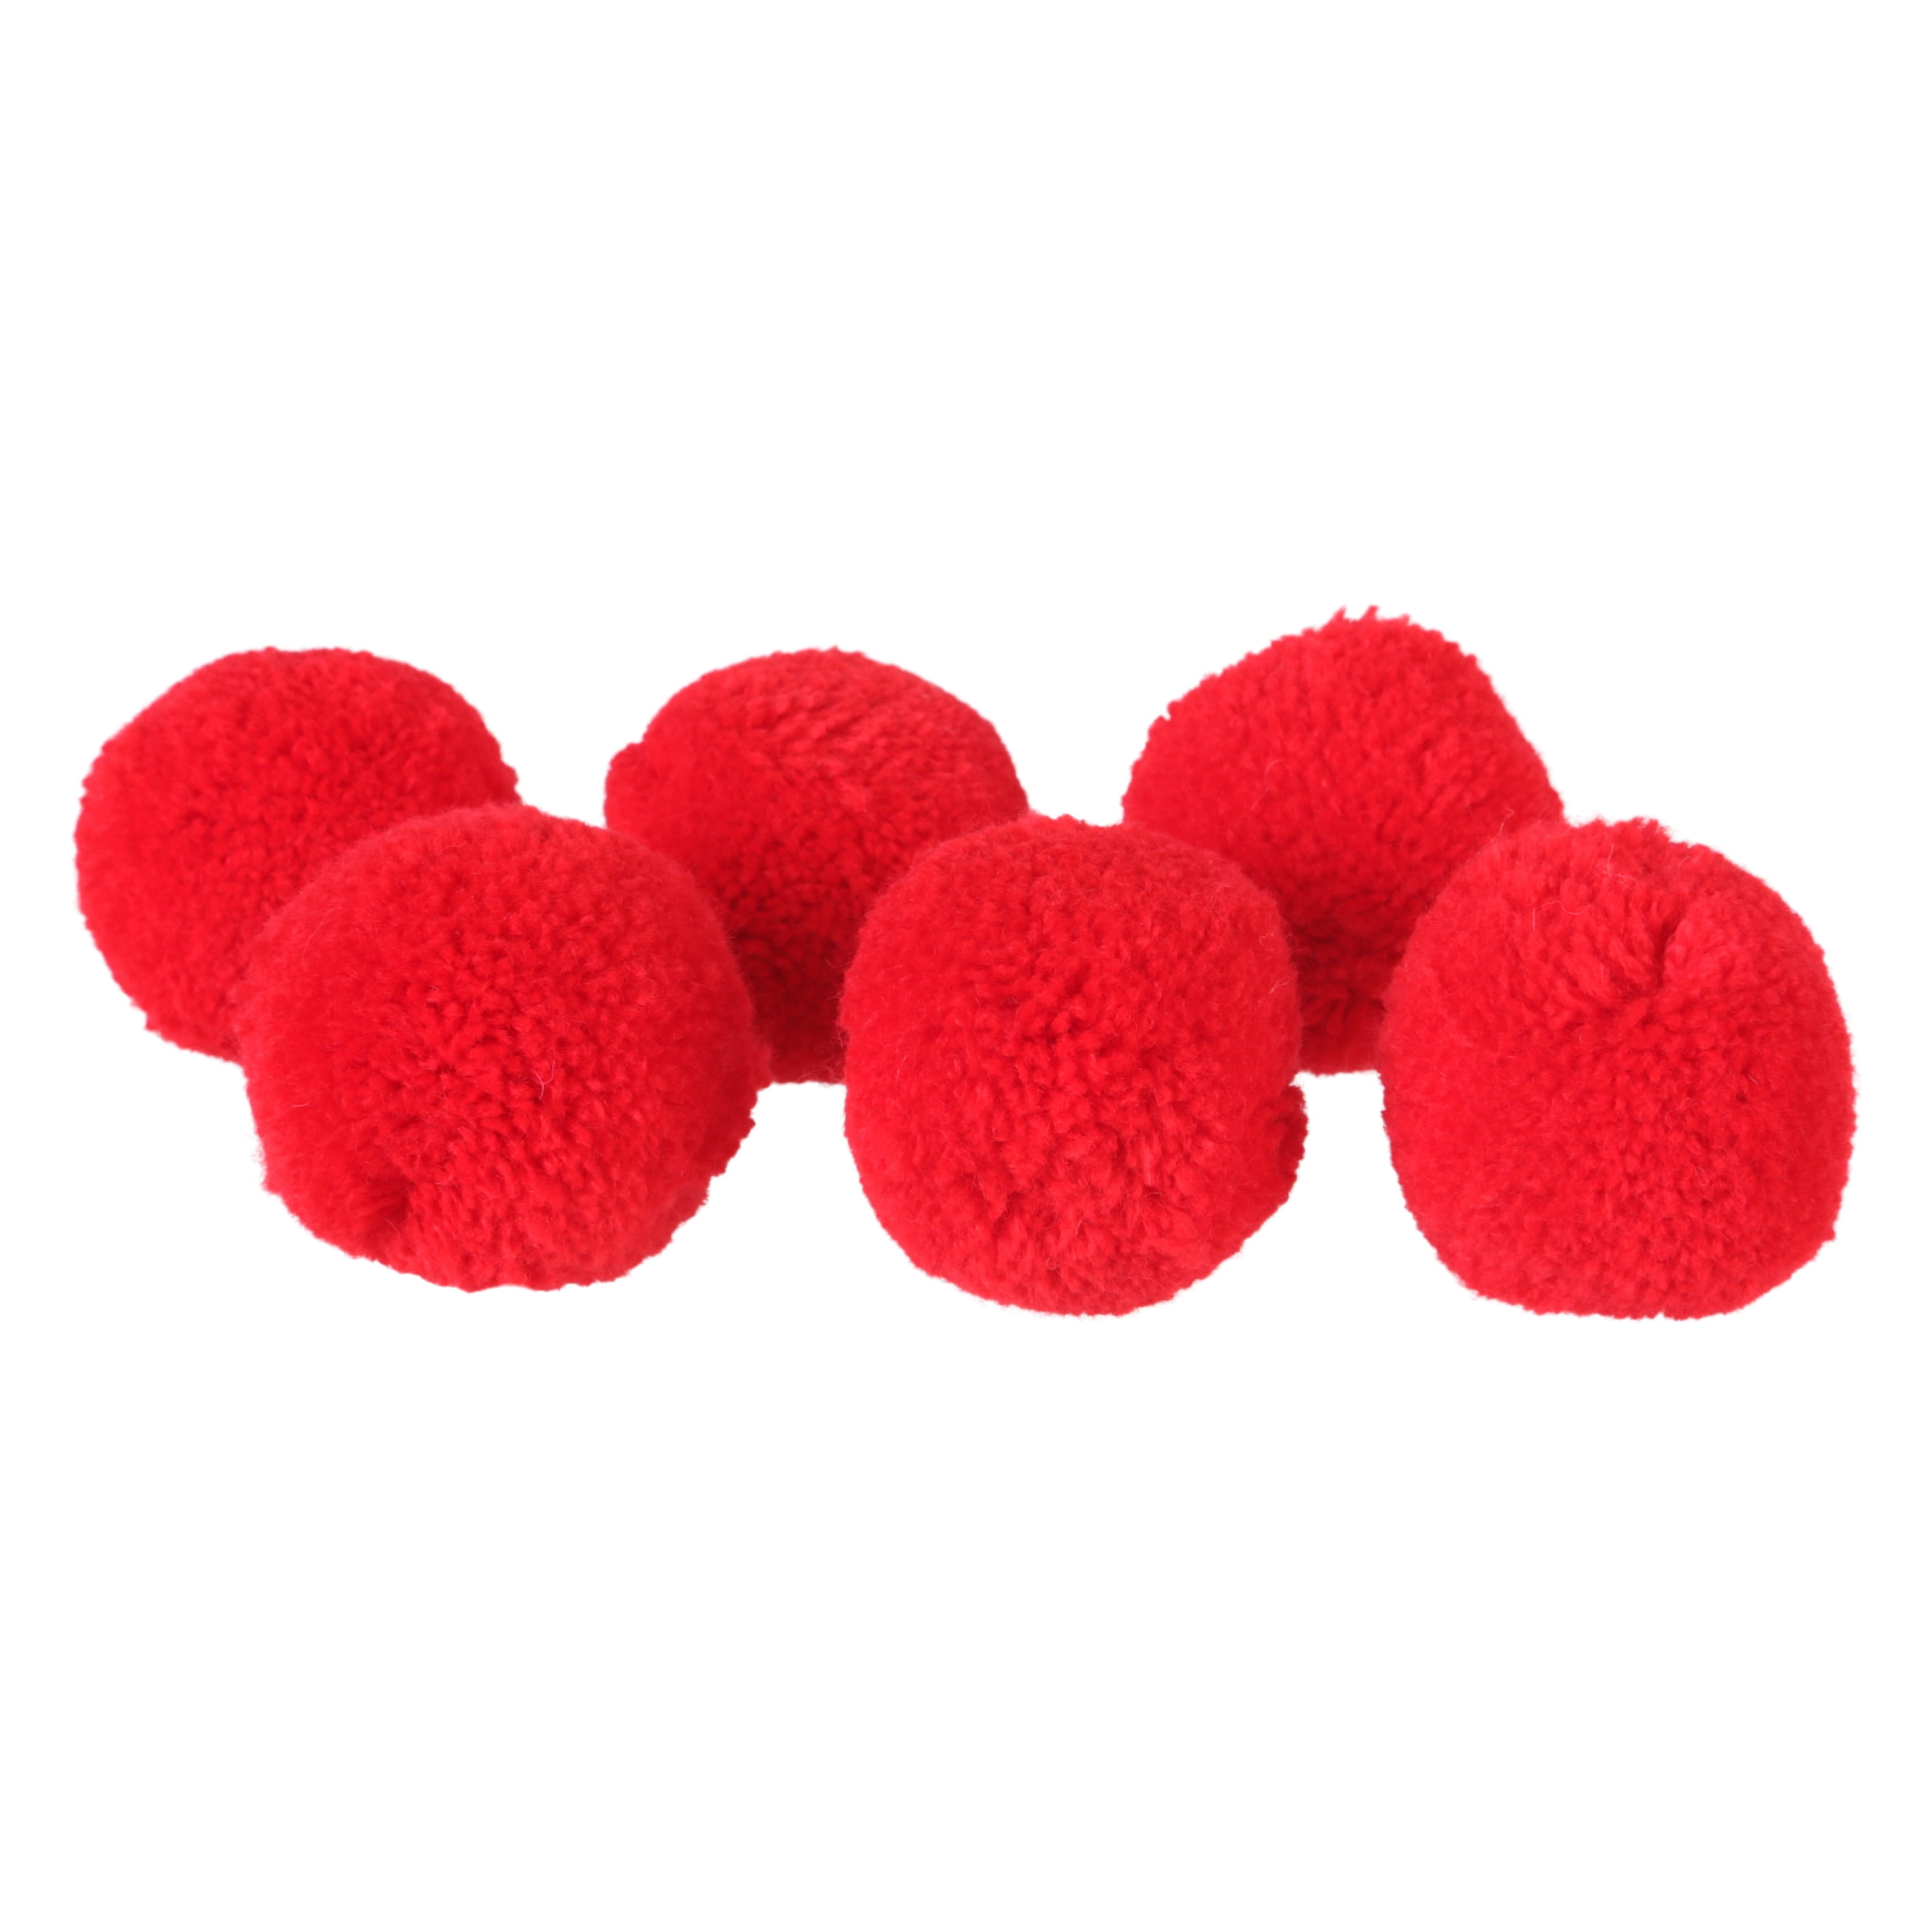 Nicole Pom Poms 1/2 Acrylic 100 Pcs Red #8514 Crafting Crafts Sewing  Christmas